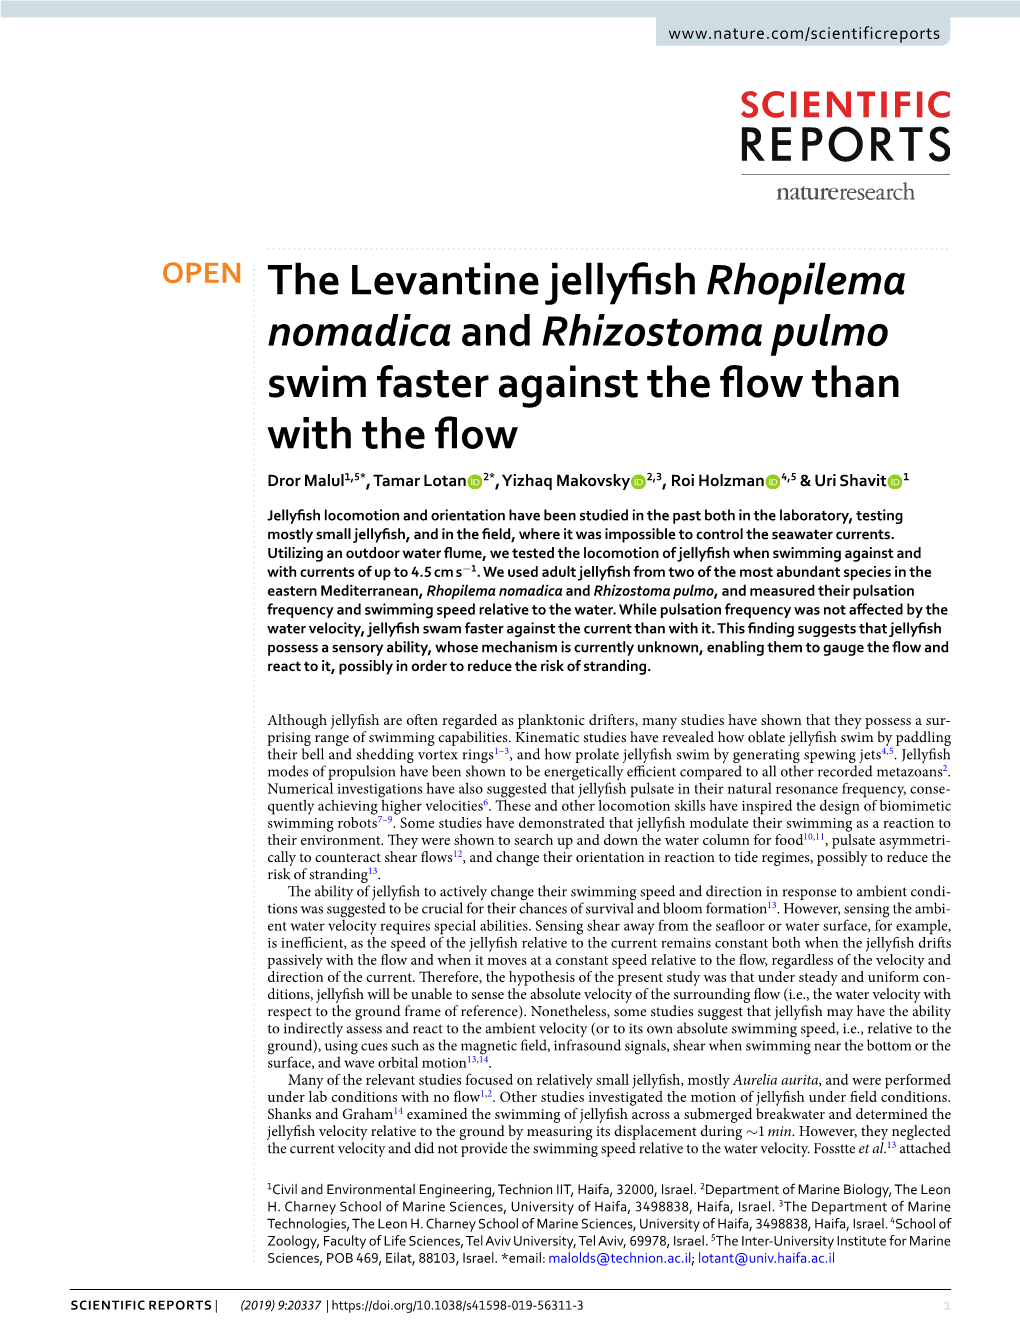 The Levantine Jellyfish Rhopilema Nomadica and Rhizostoma Pulmo Swim Faster Against the Flow Than with the Flow